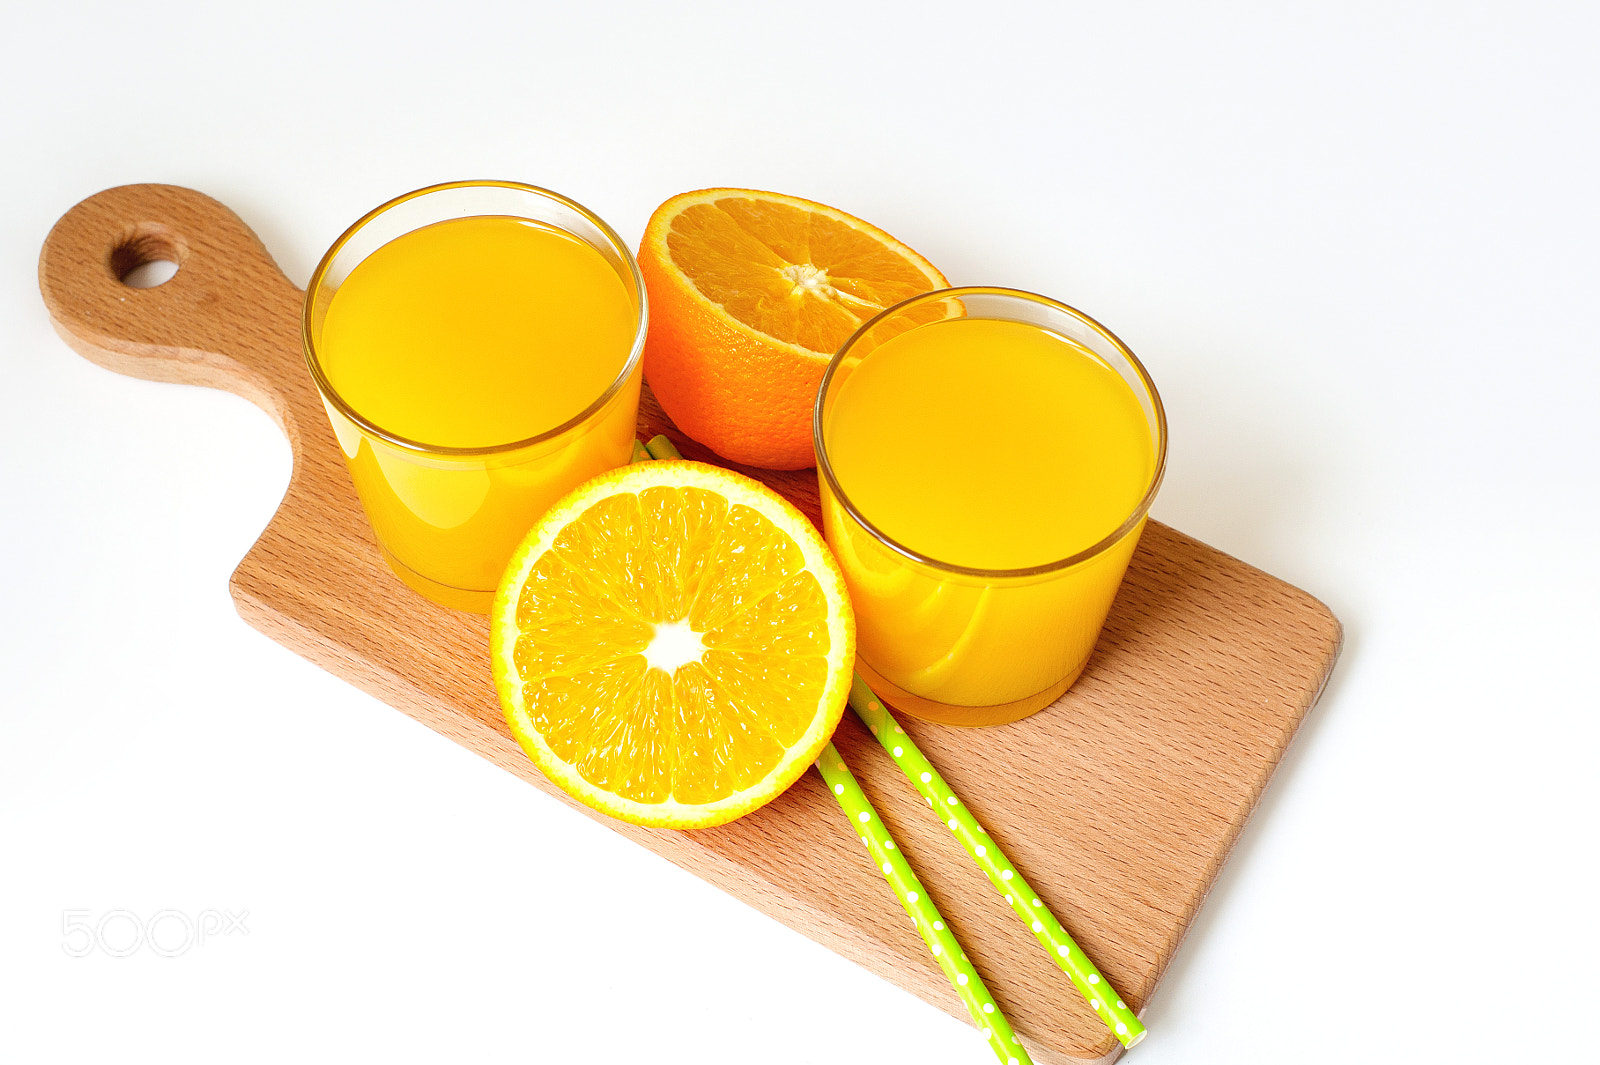 Nikon D700 sample photo. A glass of orange juice and sliced orange on the table photography